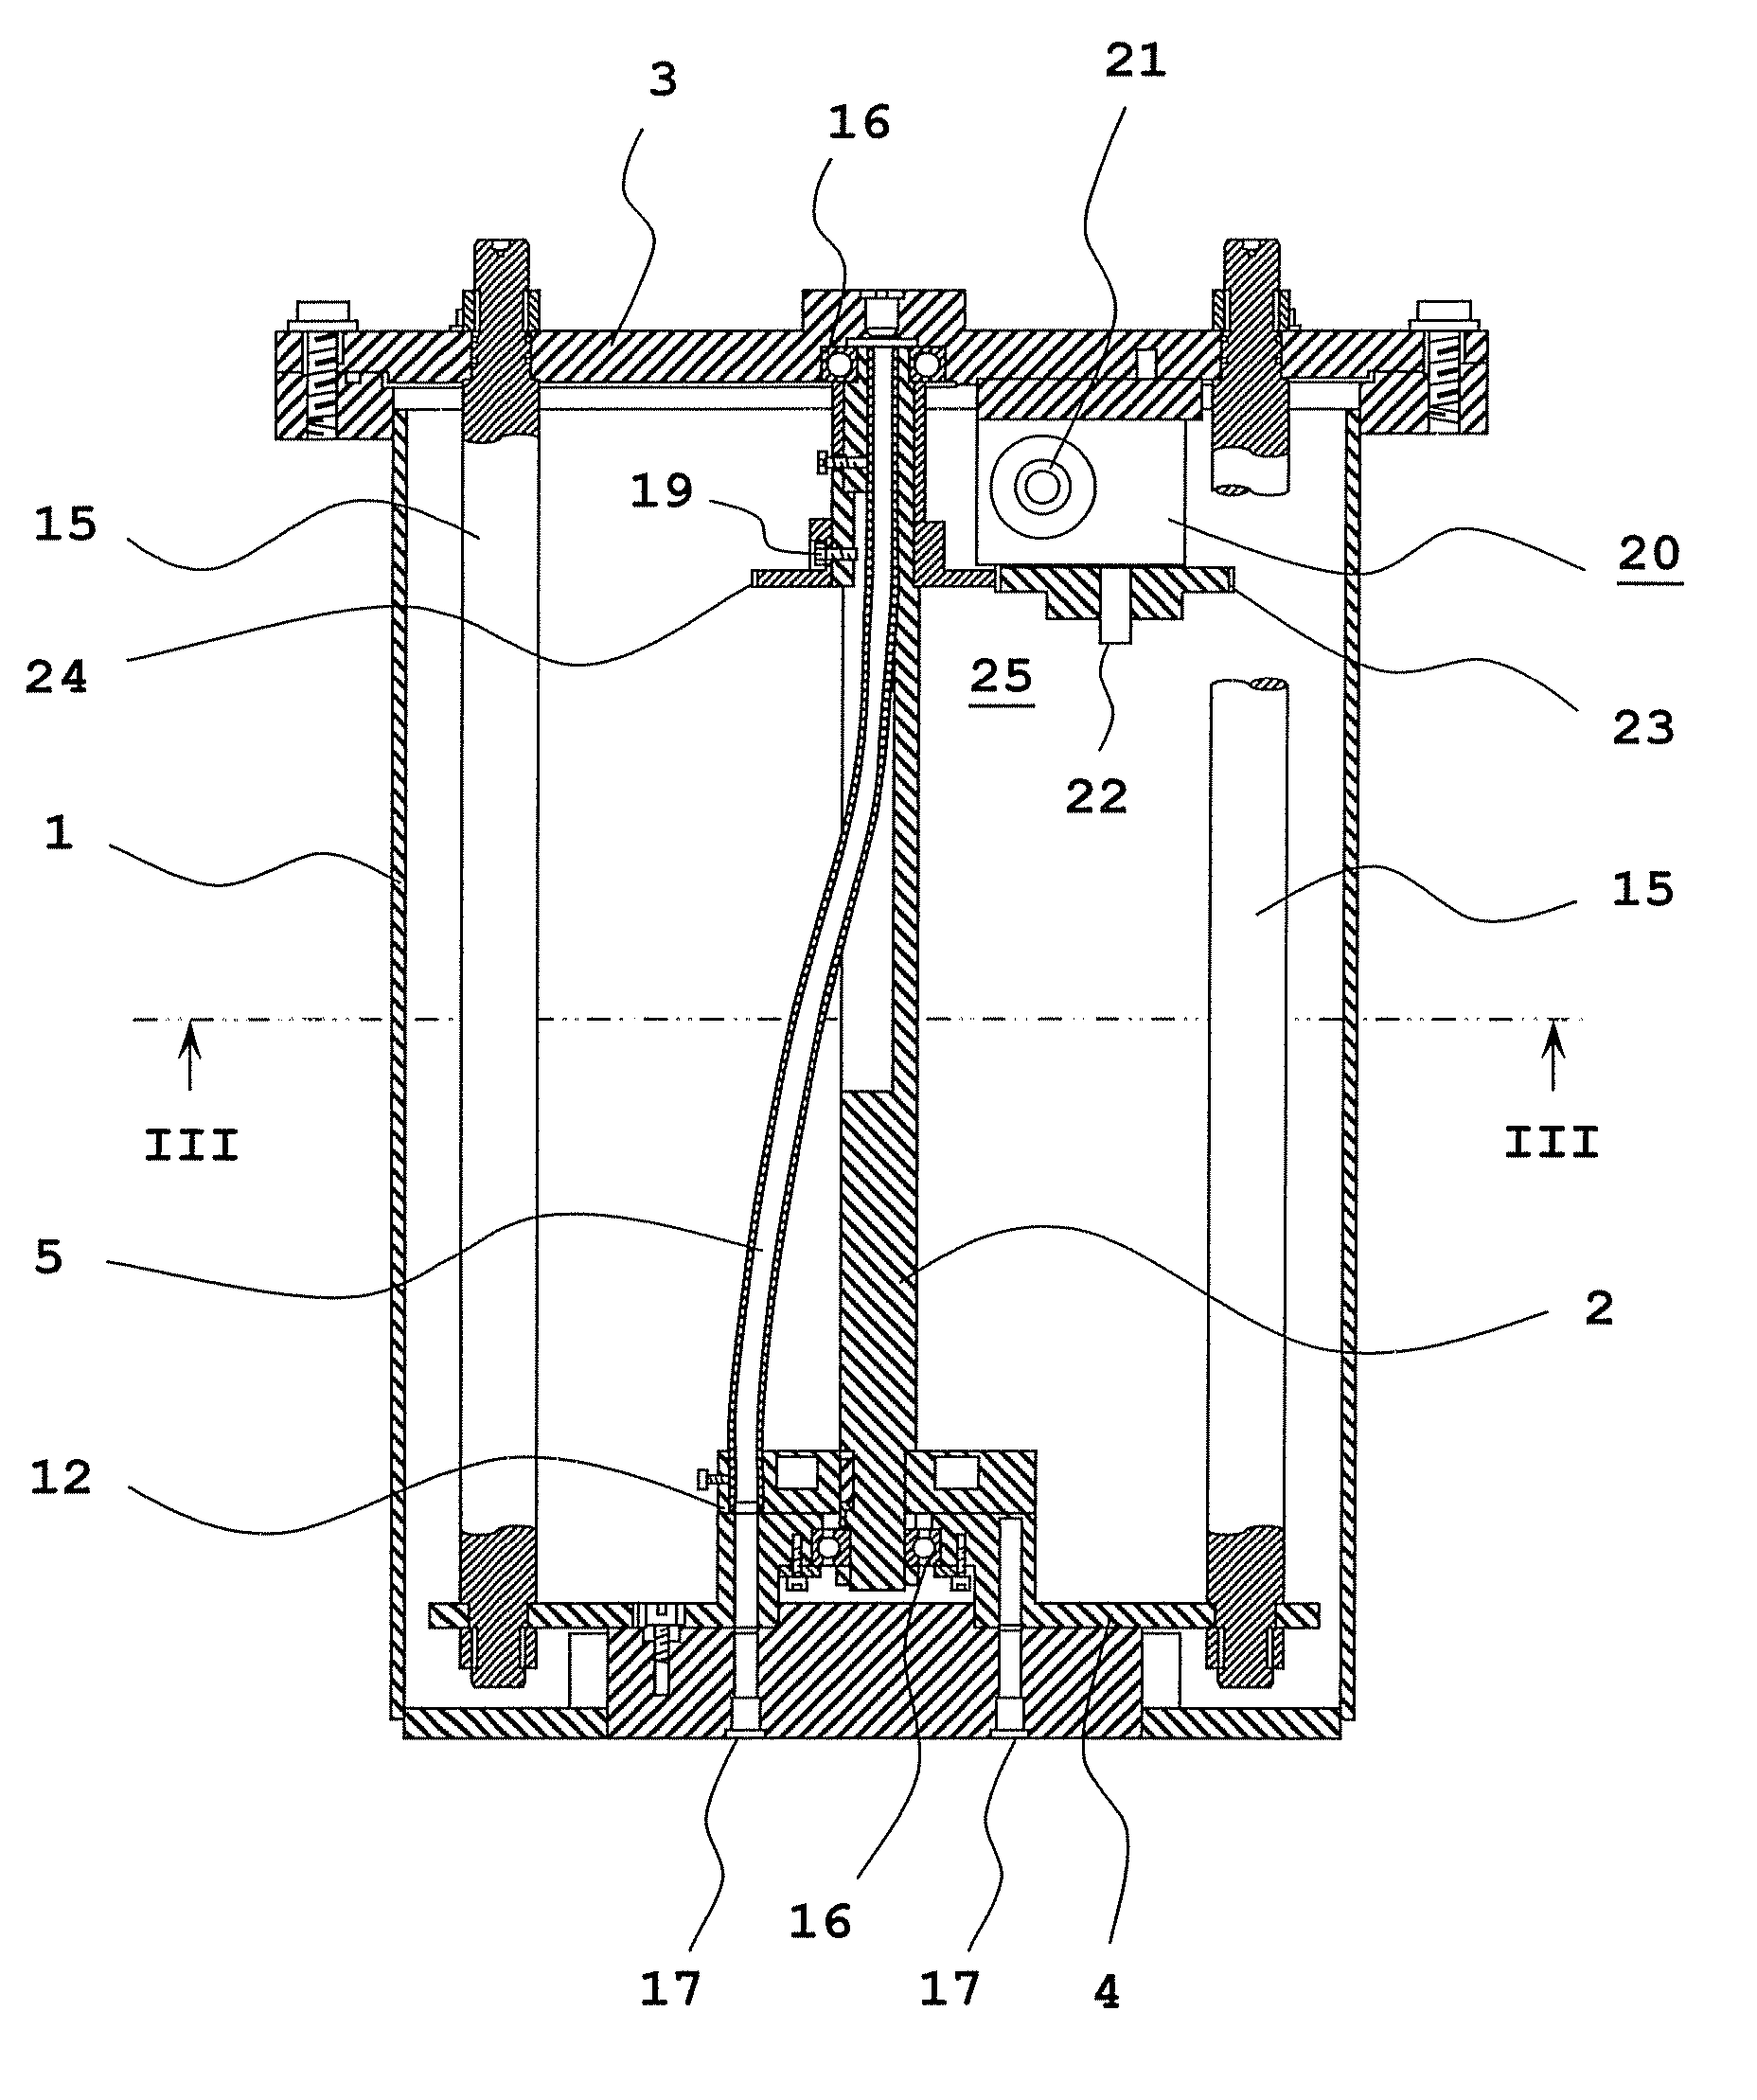 Passage selector of reactor in-core nuclear-measuring apparatus